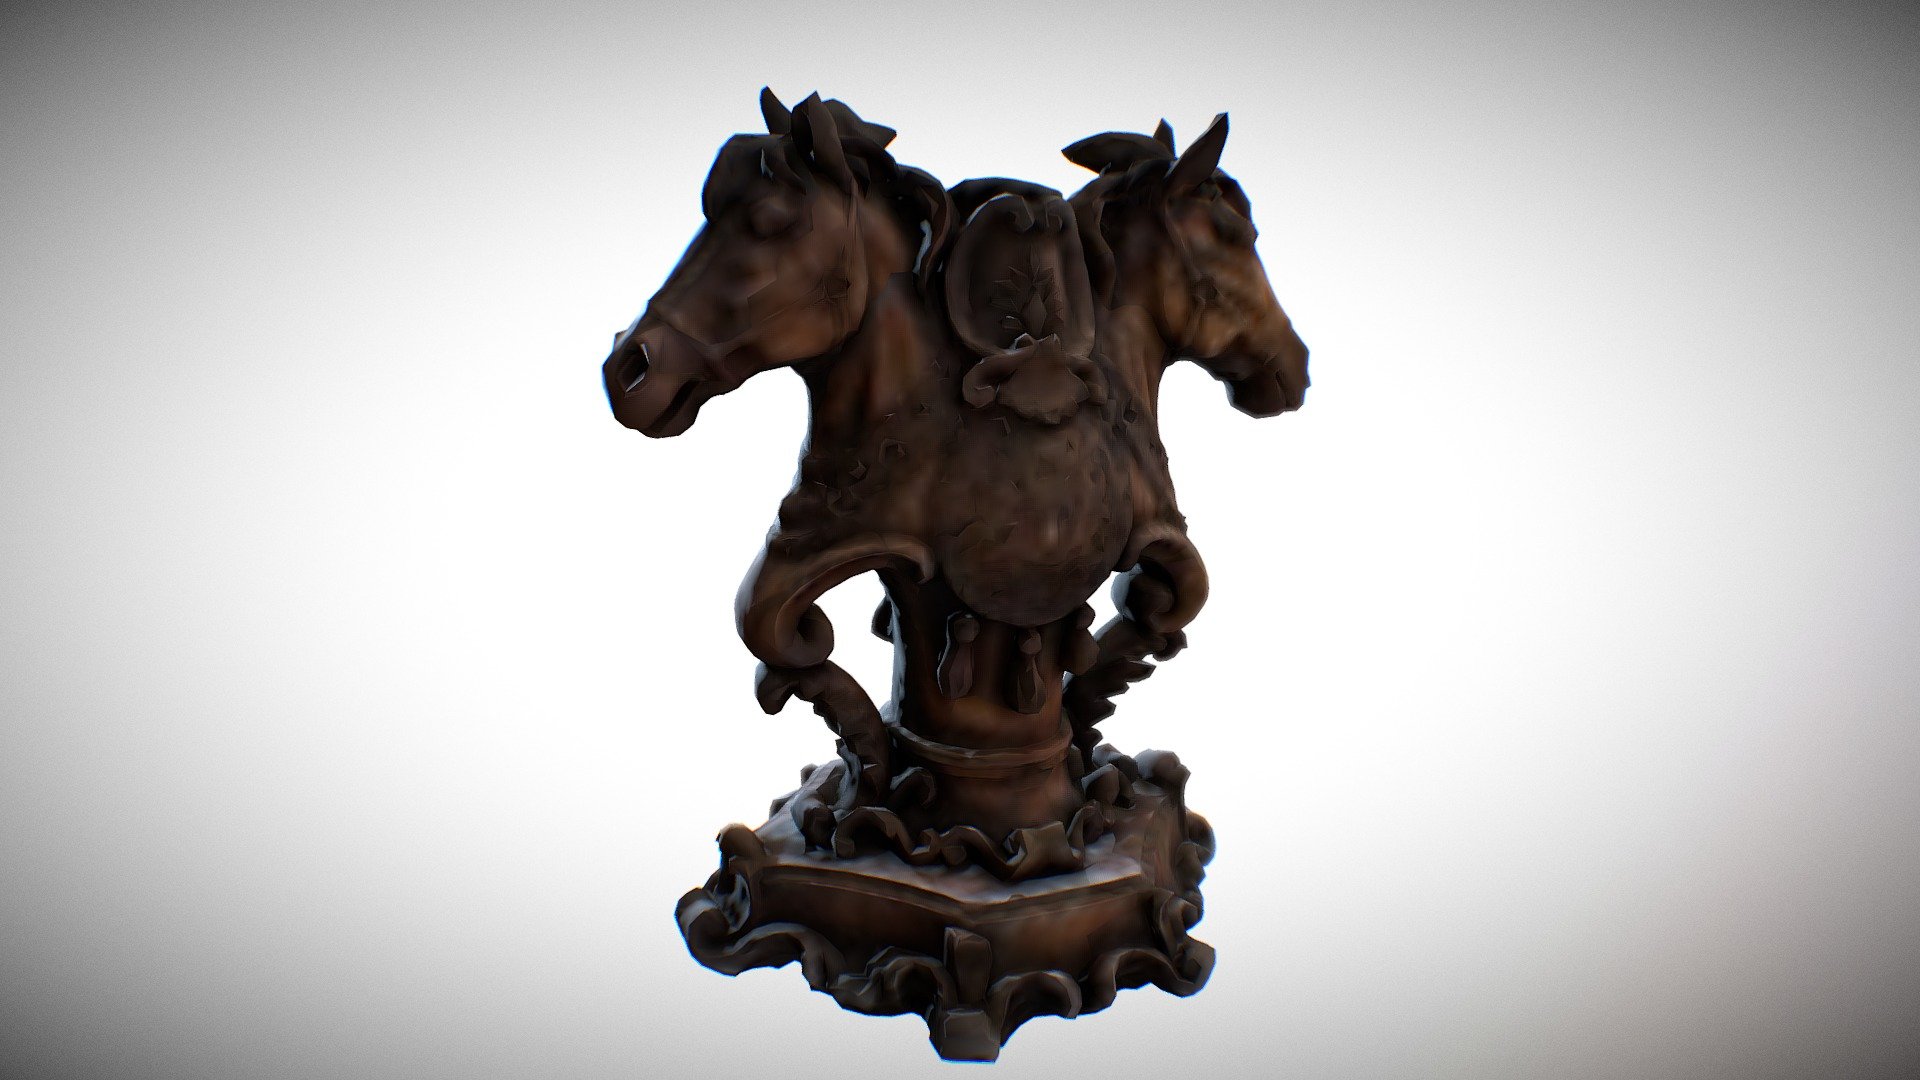 One of the frist Scan I did   while ago.I UVed it into Houdini and Bakes maps and posted on Sketchfab - Twin Head Horses - 3D model by Reza.Shahsavary 3d model